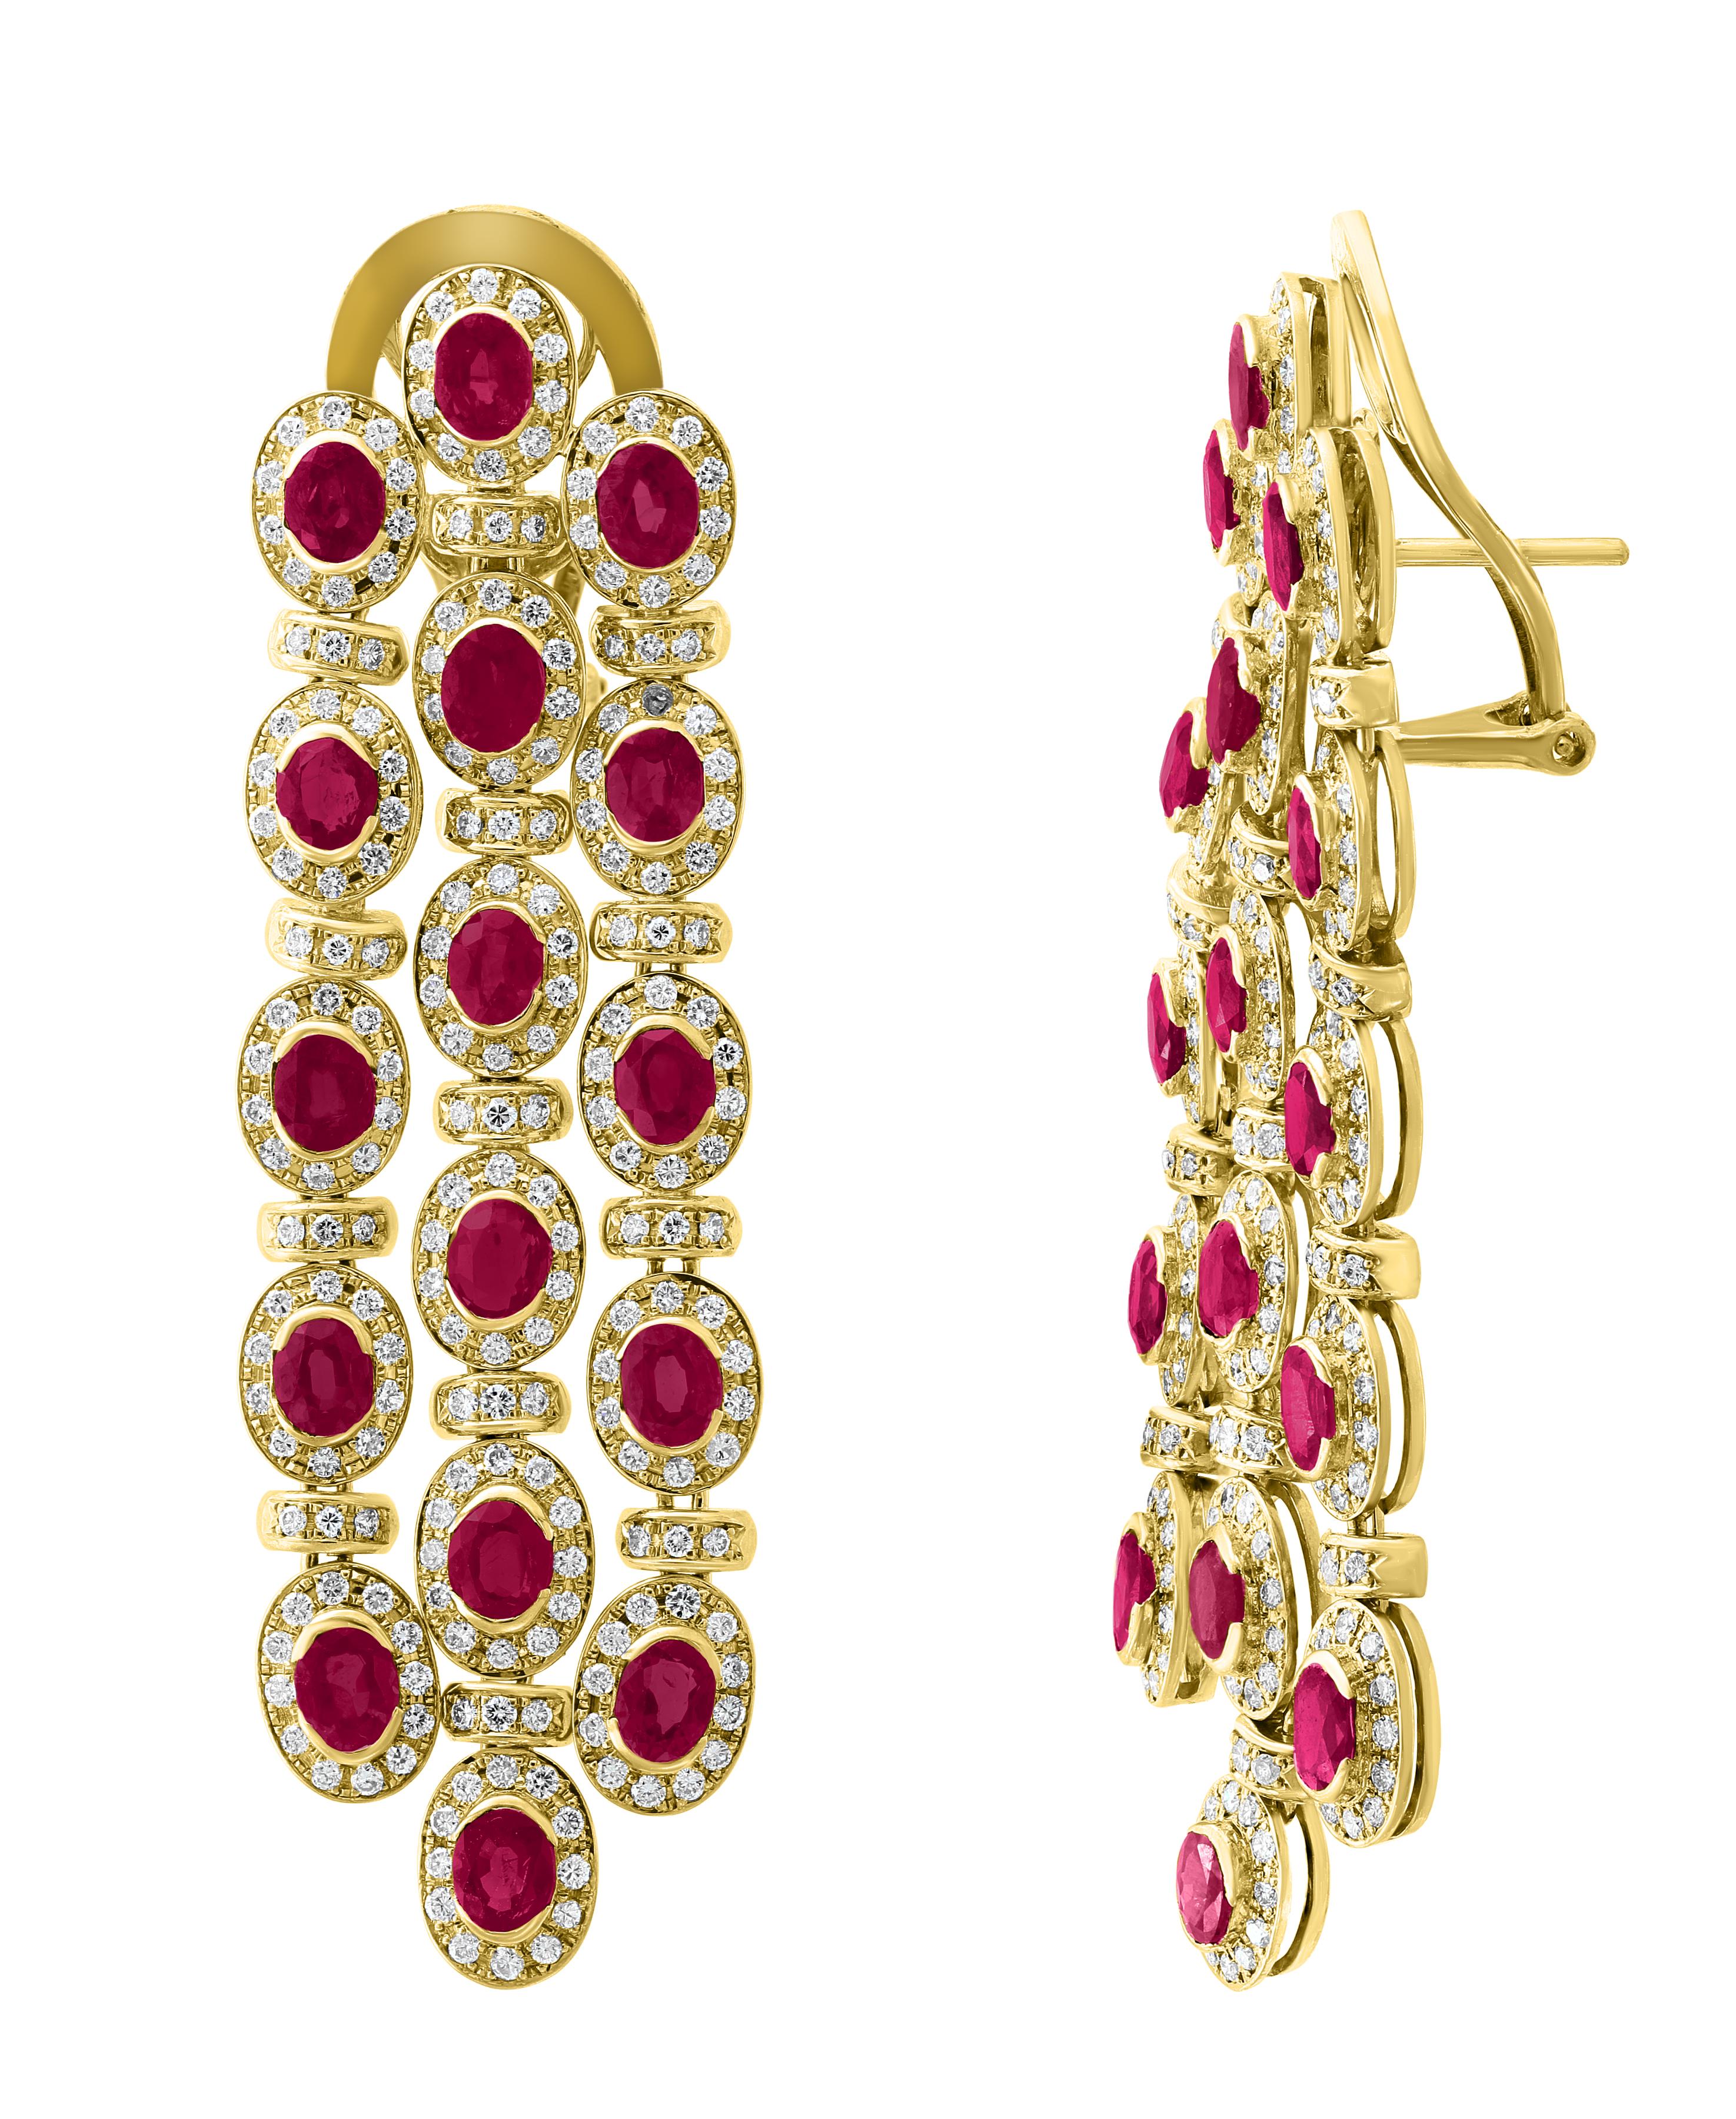 16 Ct Natural Burma Ruby & 10 Ct  Diamond Hanging/Drop Earrings 18 Kt Gold 35 Gm
This exquisite pair of earrings are beautifully crafted with 18 karat Yellow gold weighing    
35 grams
Three rows of Natural Burma ruby with with no color enhancement